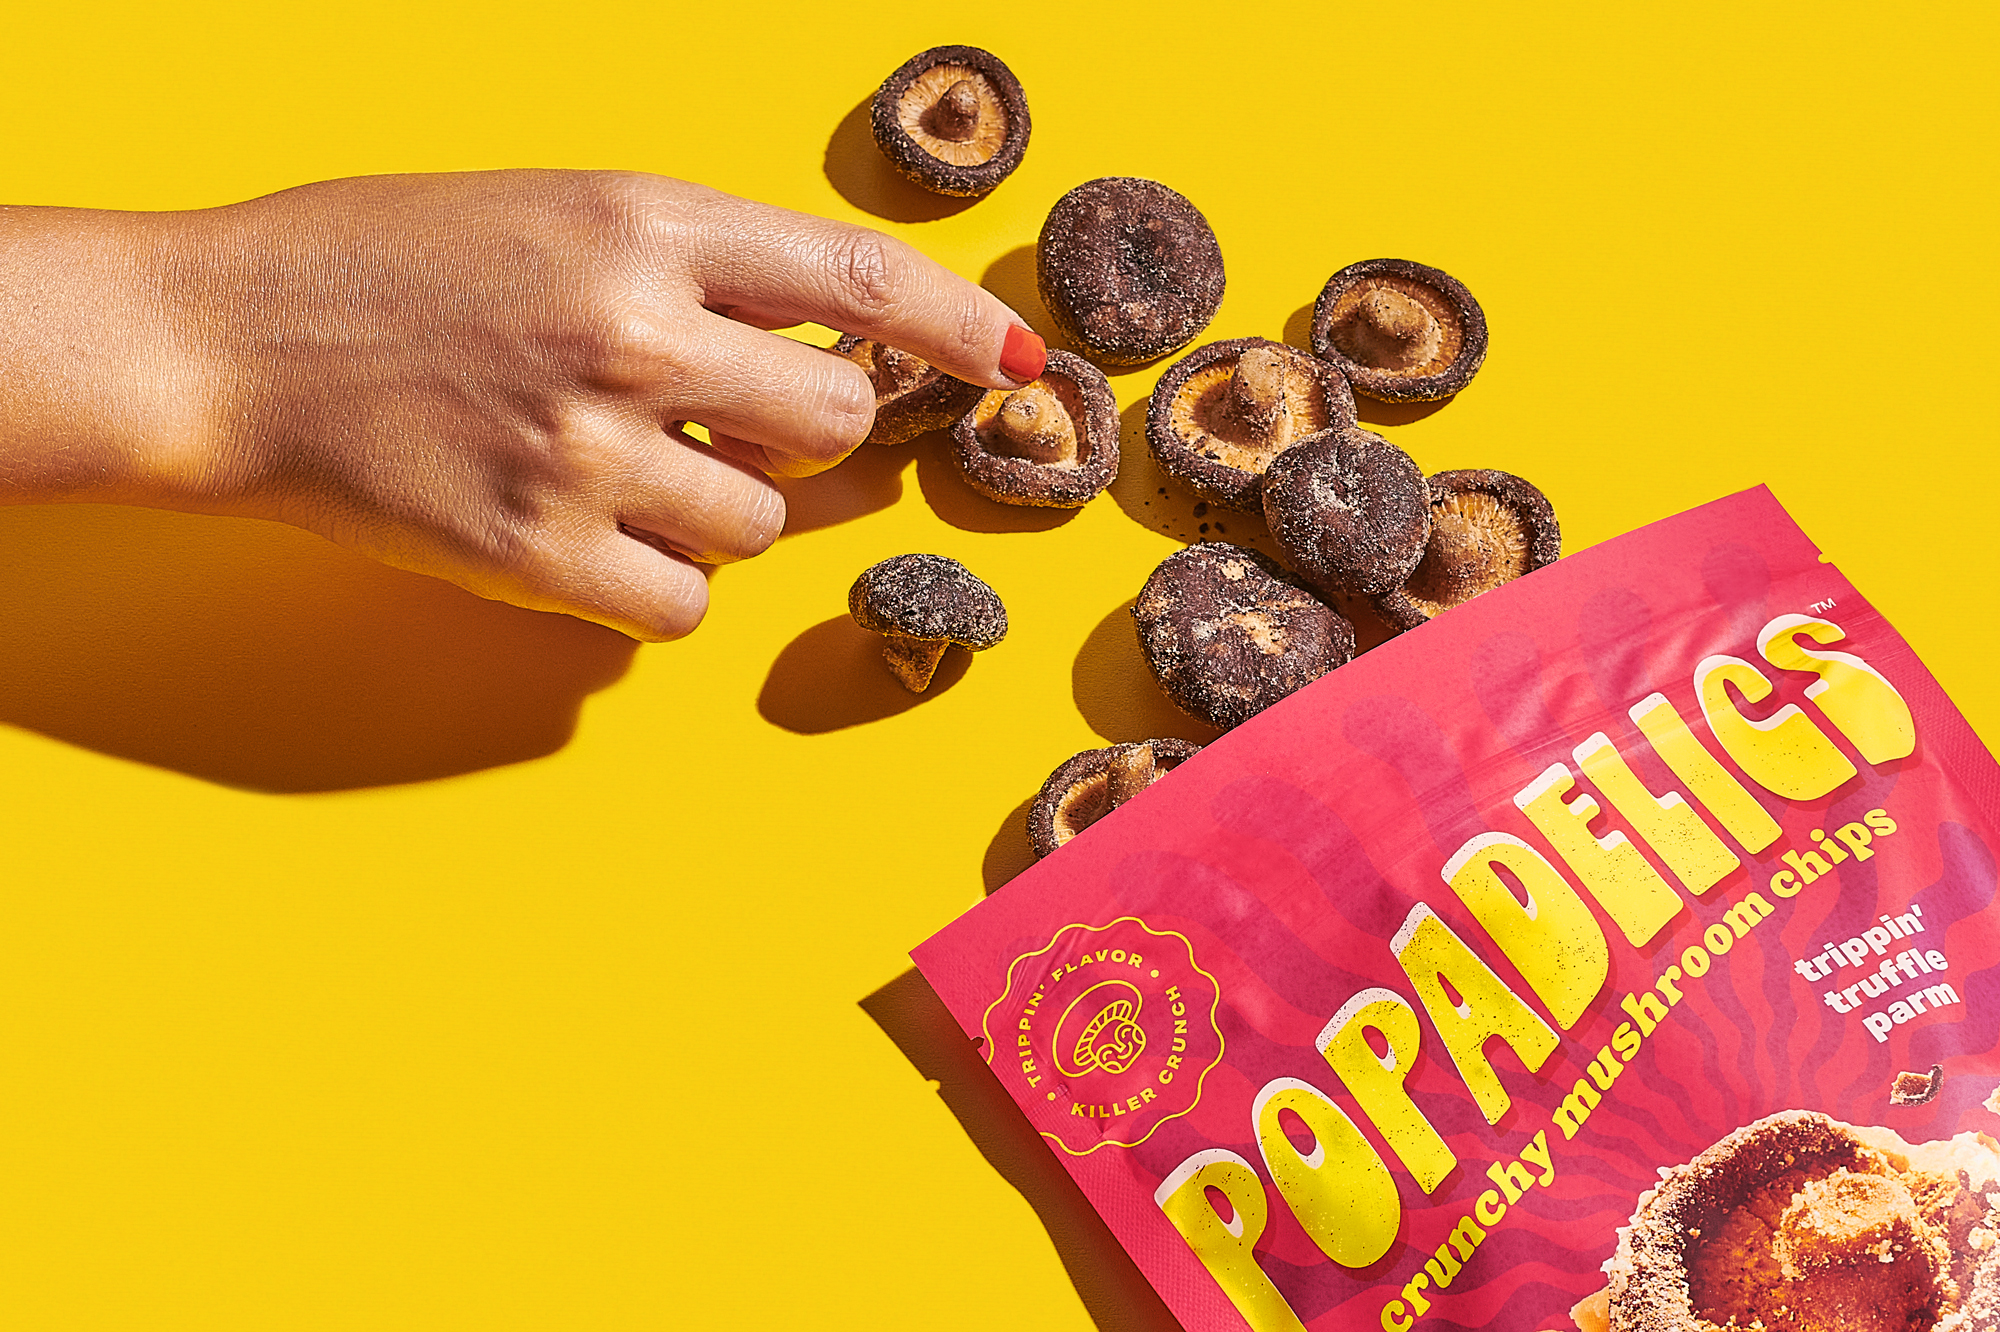 Popadelics brand launch snack packaging design and product.